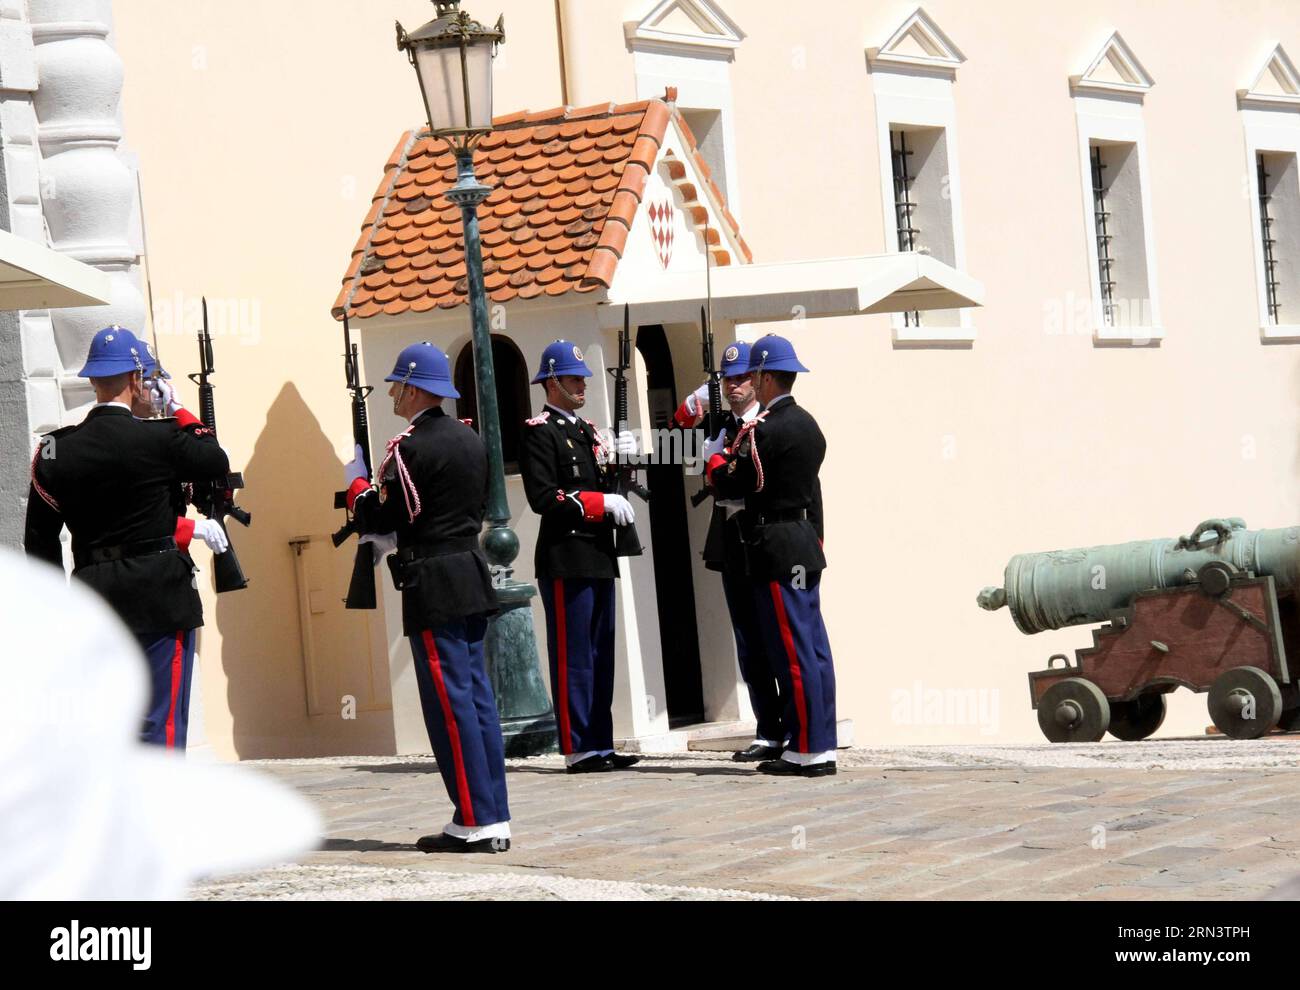 (150426) -- MONACO, April 26, 2015 -- Photo taken on April 23, 2015 shows the guard changing ceremony on the Palace Square of Monaco. The traditional guard changing ceremony of Monaco is held at 11:55 a.m. on the Palace Square everyday. ) MONACO-GUARD CHANGING CEREMONY ZhengxBin PUBLICATIONxNOTxINxCHN   Monaco April 26 2015 Photo Taken ON April 23 2015 Shows The Guard Changing Ceremony ON The Palace Square of Monaco The Traditional Guard Changing Ceremony of Monaco IS Hero AT 11 55 a M ON The Palace Square everyday Monaco Guard Changing Ceremony  PUBLICATIONxNOTxINxCHN Stock Photo